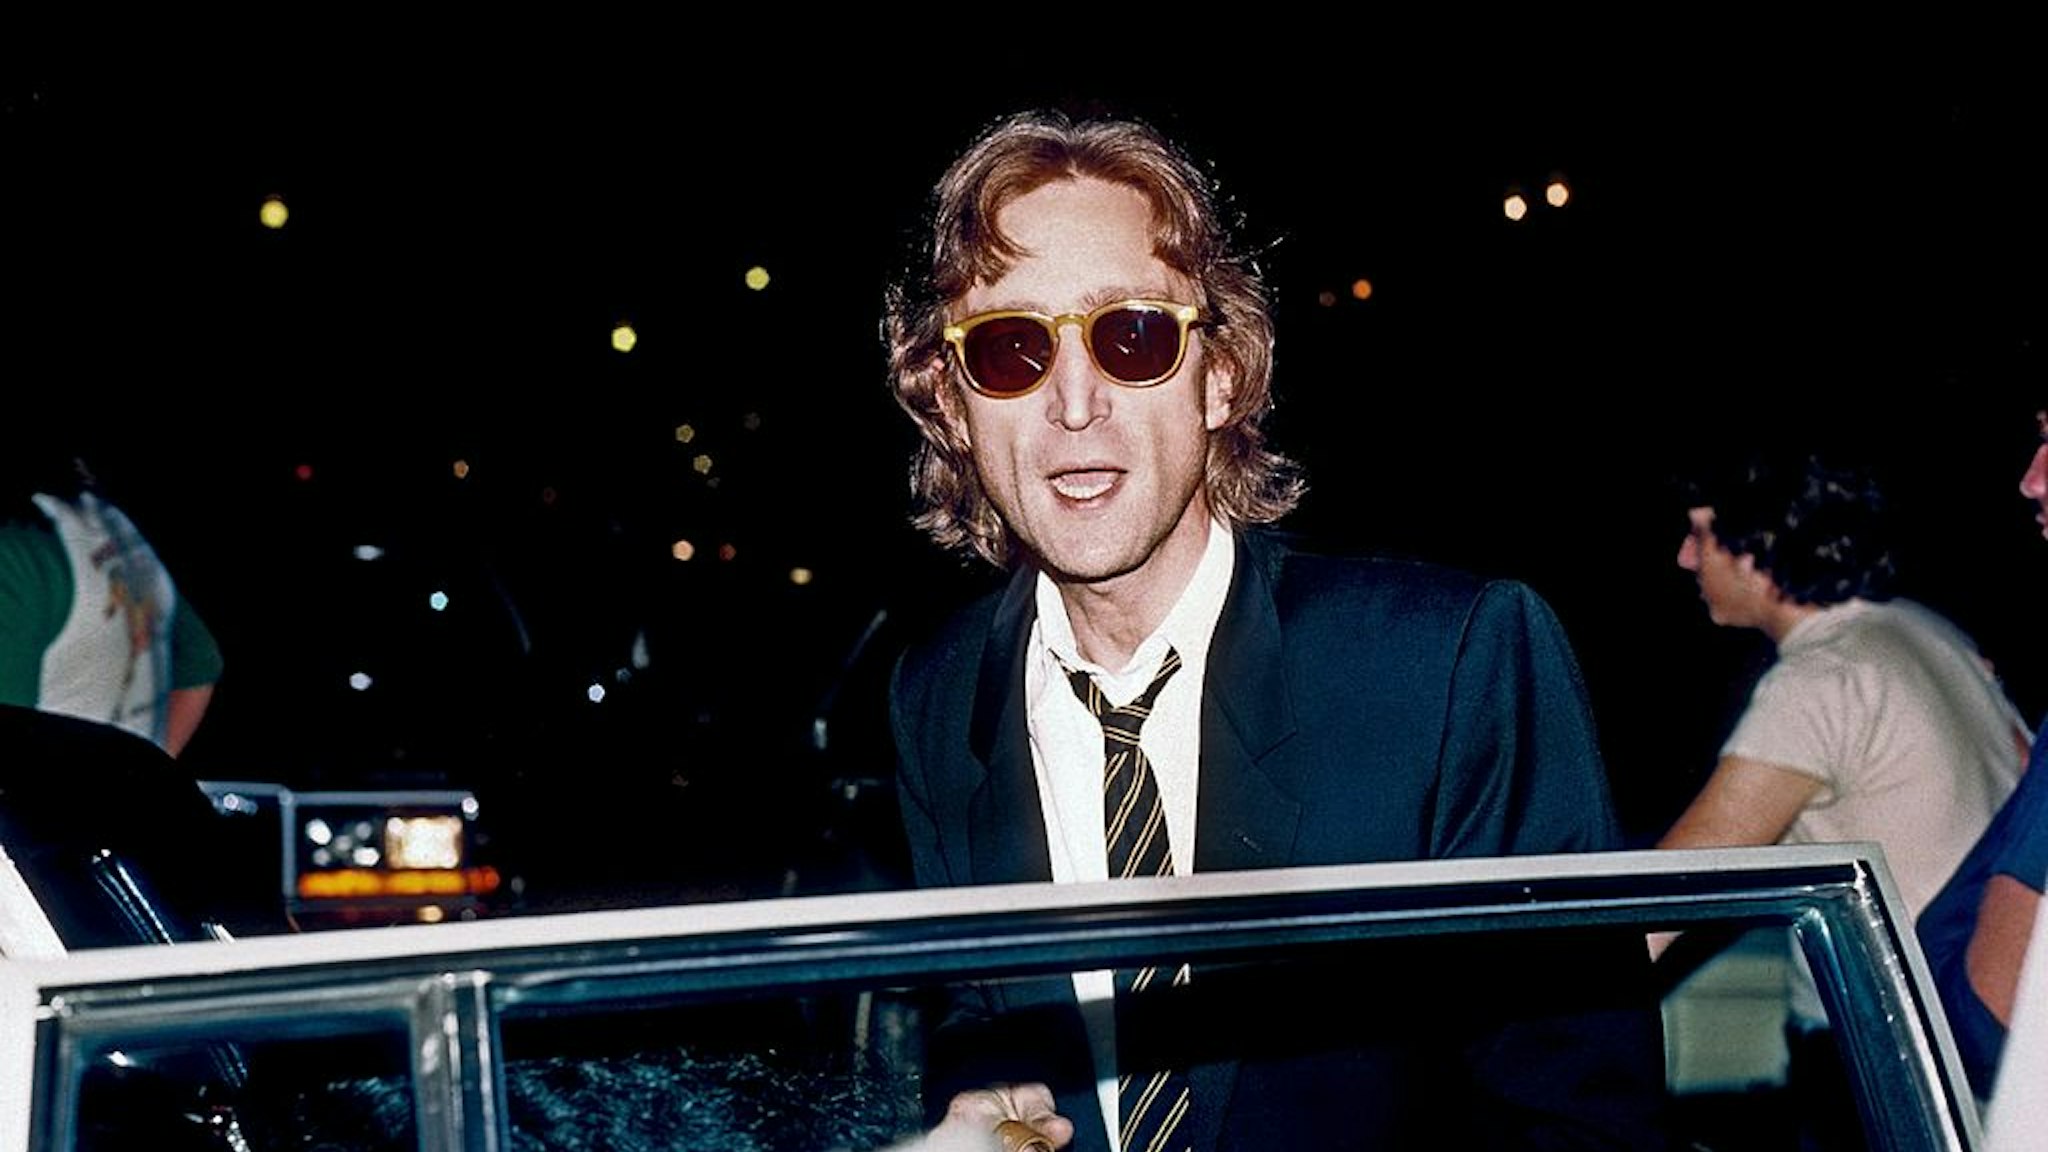 Former Beatle John Lennon arrives at the Times Square recording studio 'The Hit Factory' before a recording session of his final album 'Double Fanasy' in August 1980 in New York City, New York.